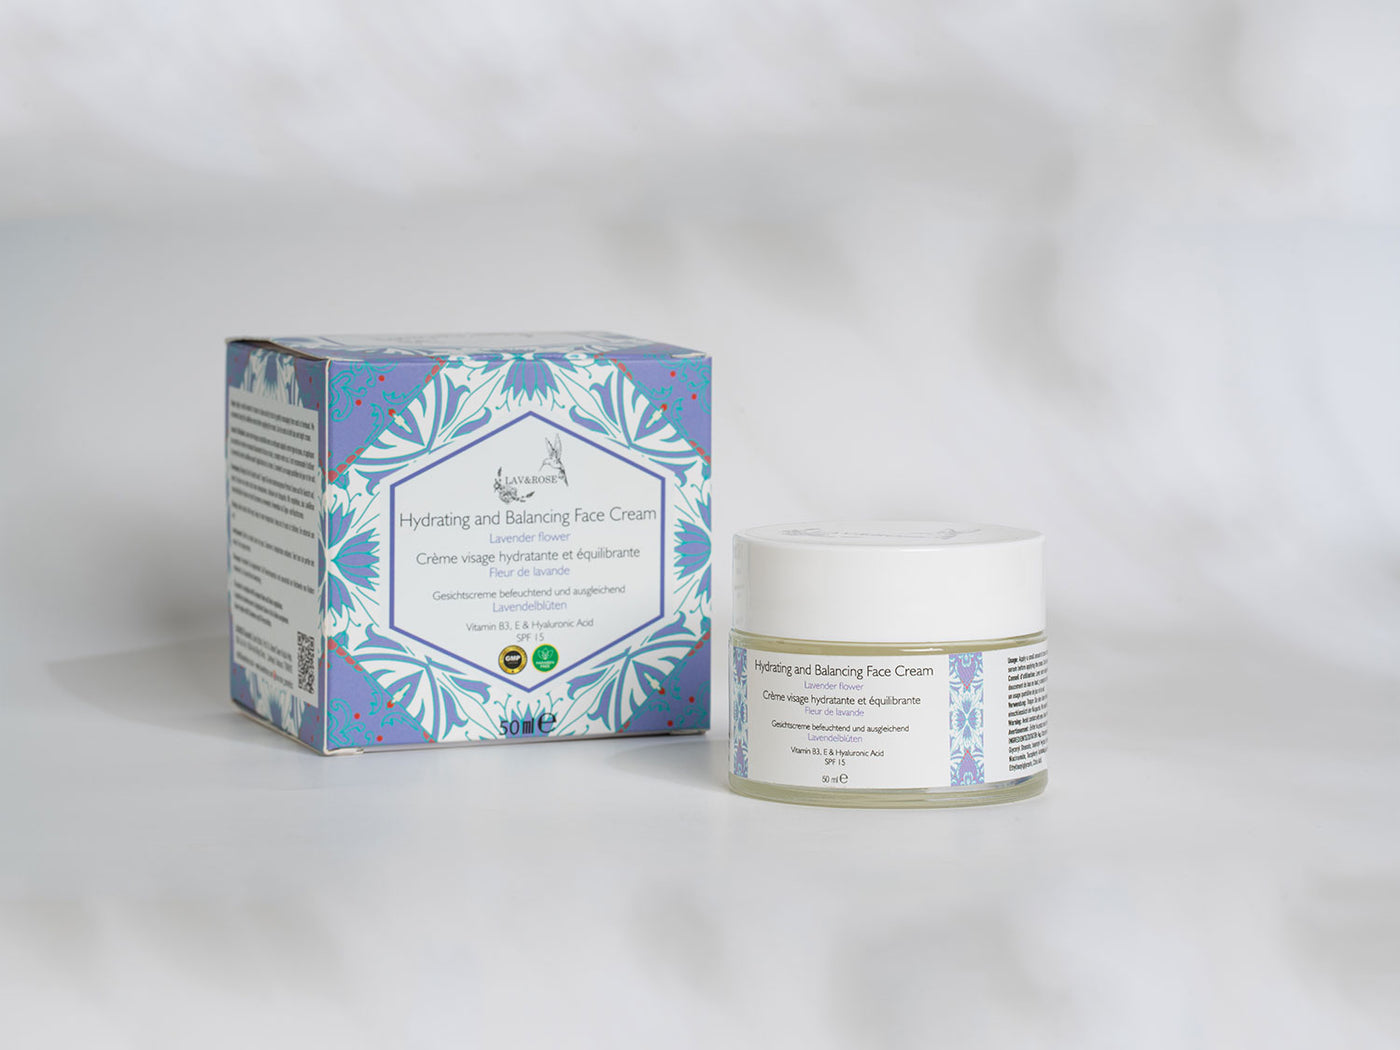 Hydrating and Balancing Face Cream with vitamin B-3, E, Hyaluronic